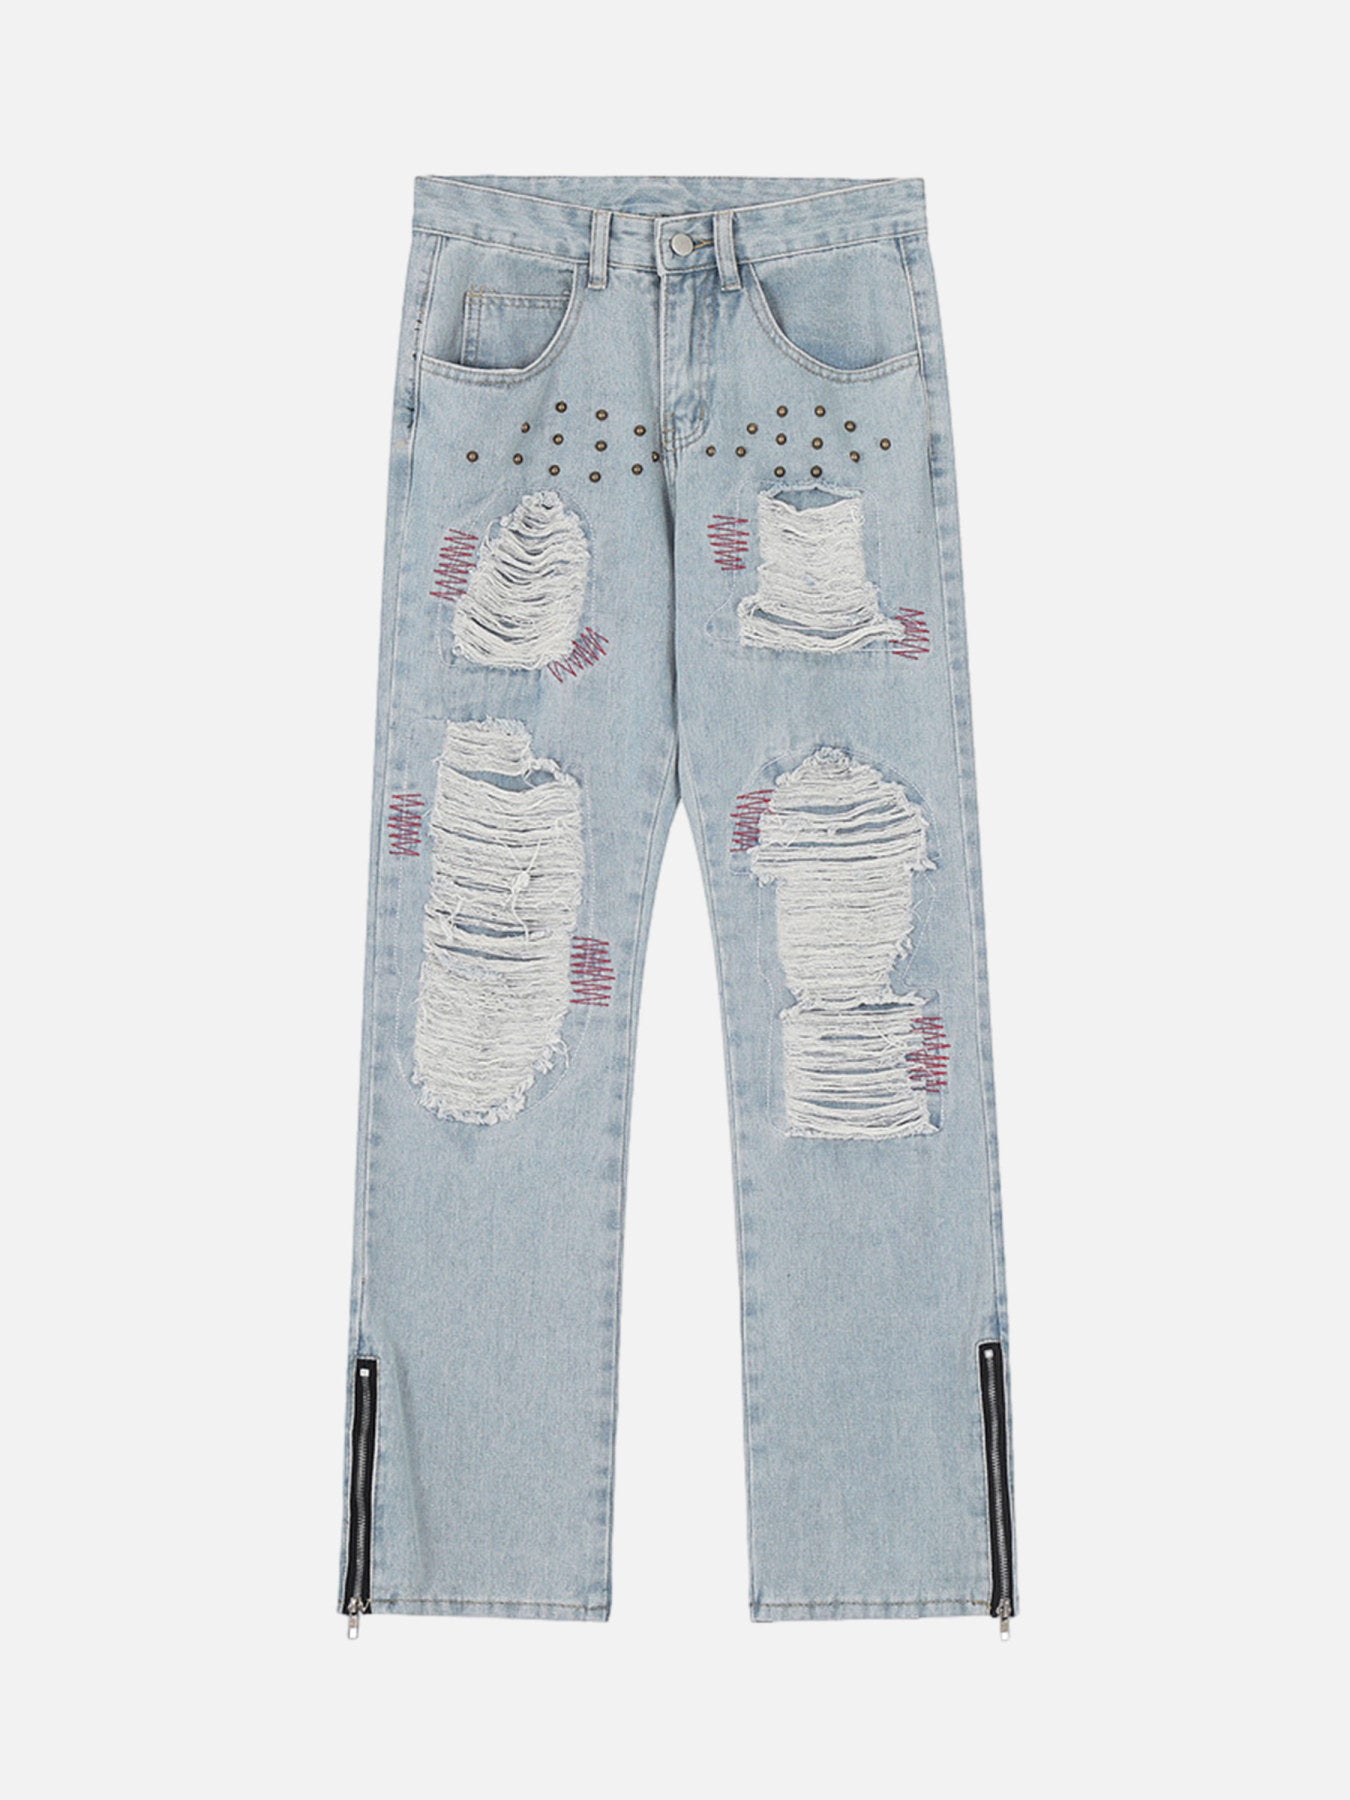 The Supermade High Street Old Heavy-duty Ripped Jeans